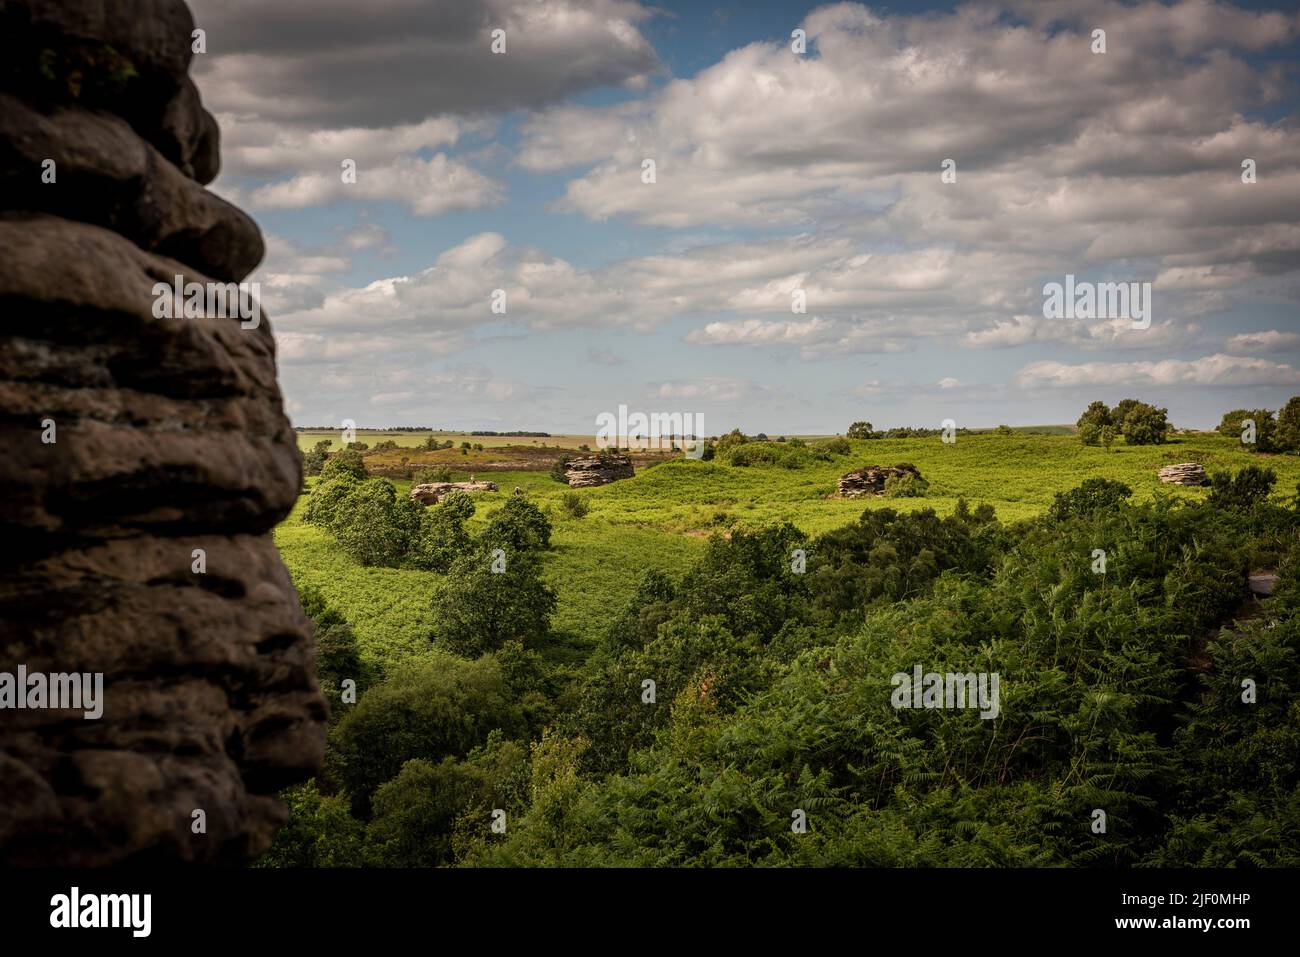 The Bridestones natural rock formations created by erosion in the Dalby Forest, North Yorkshire, UK Stock Photo